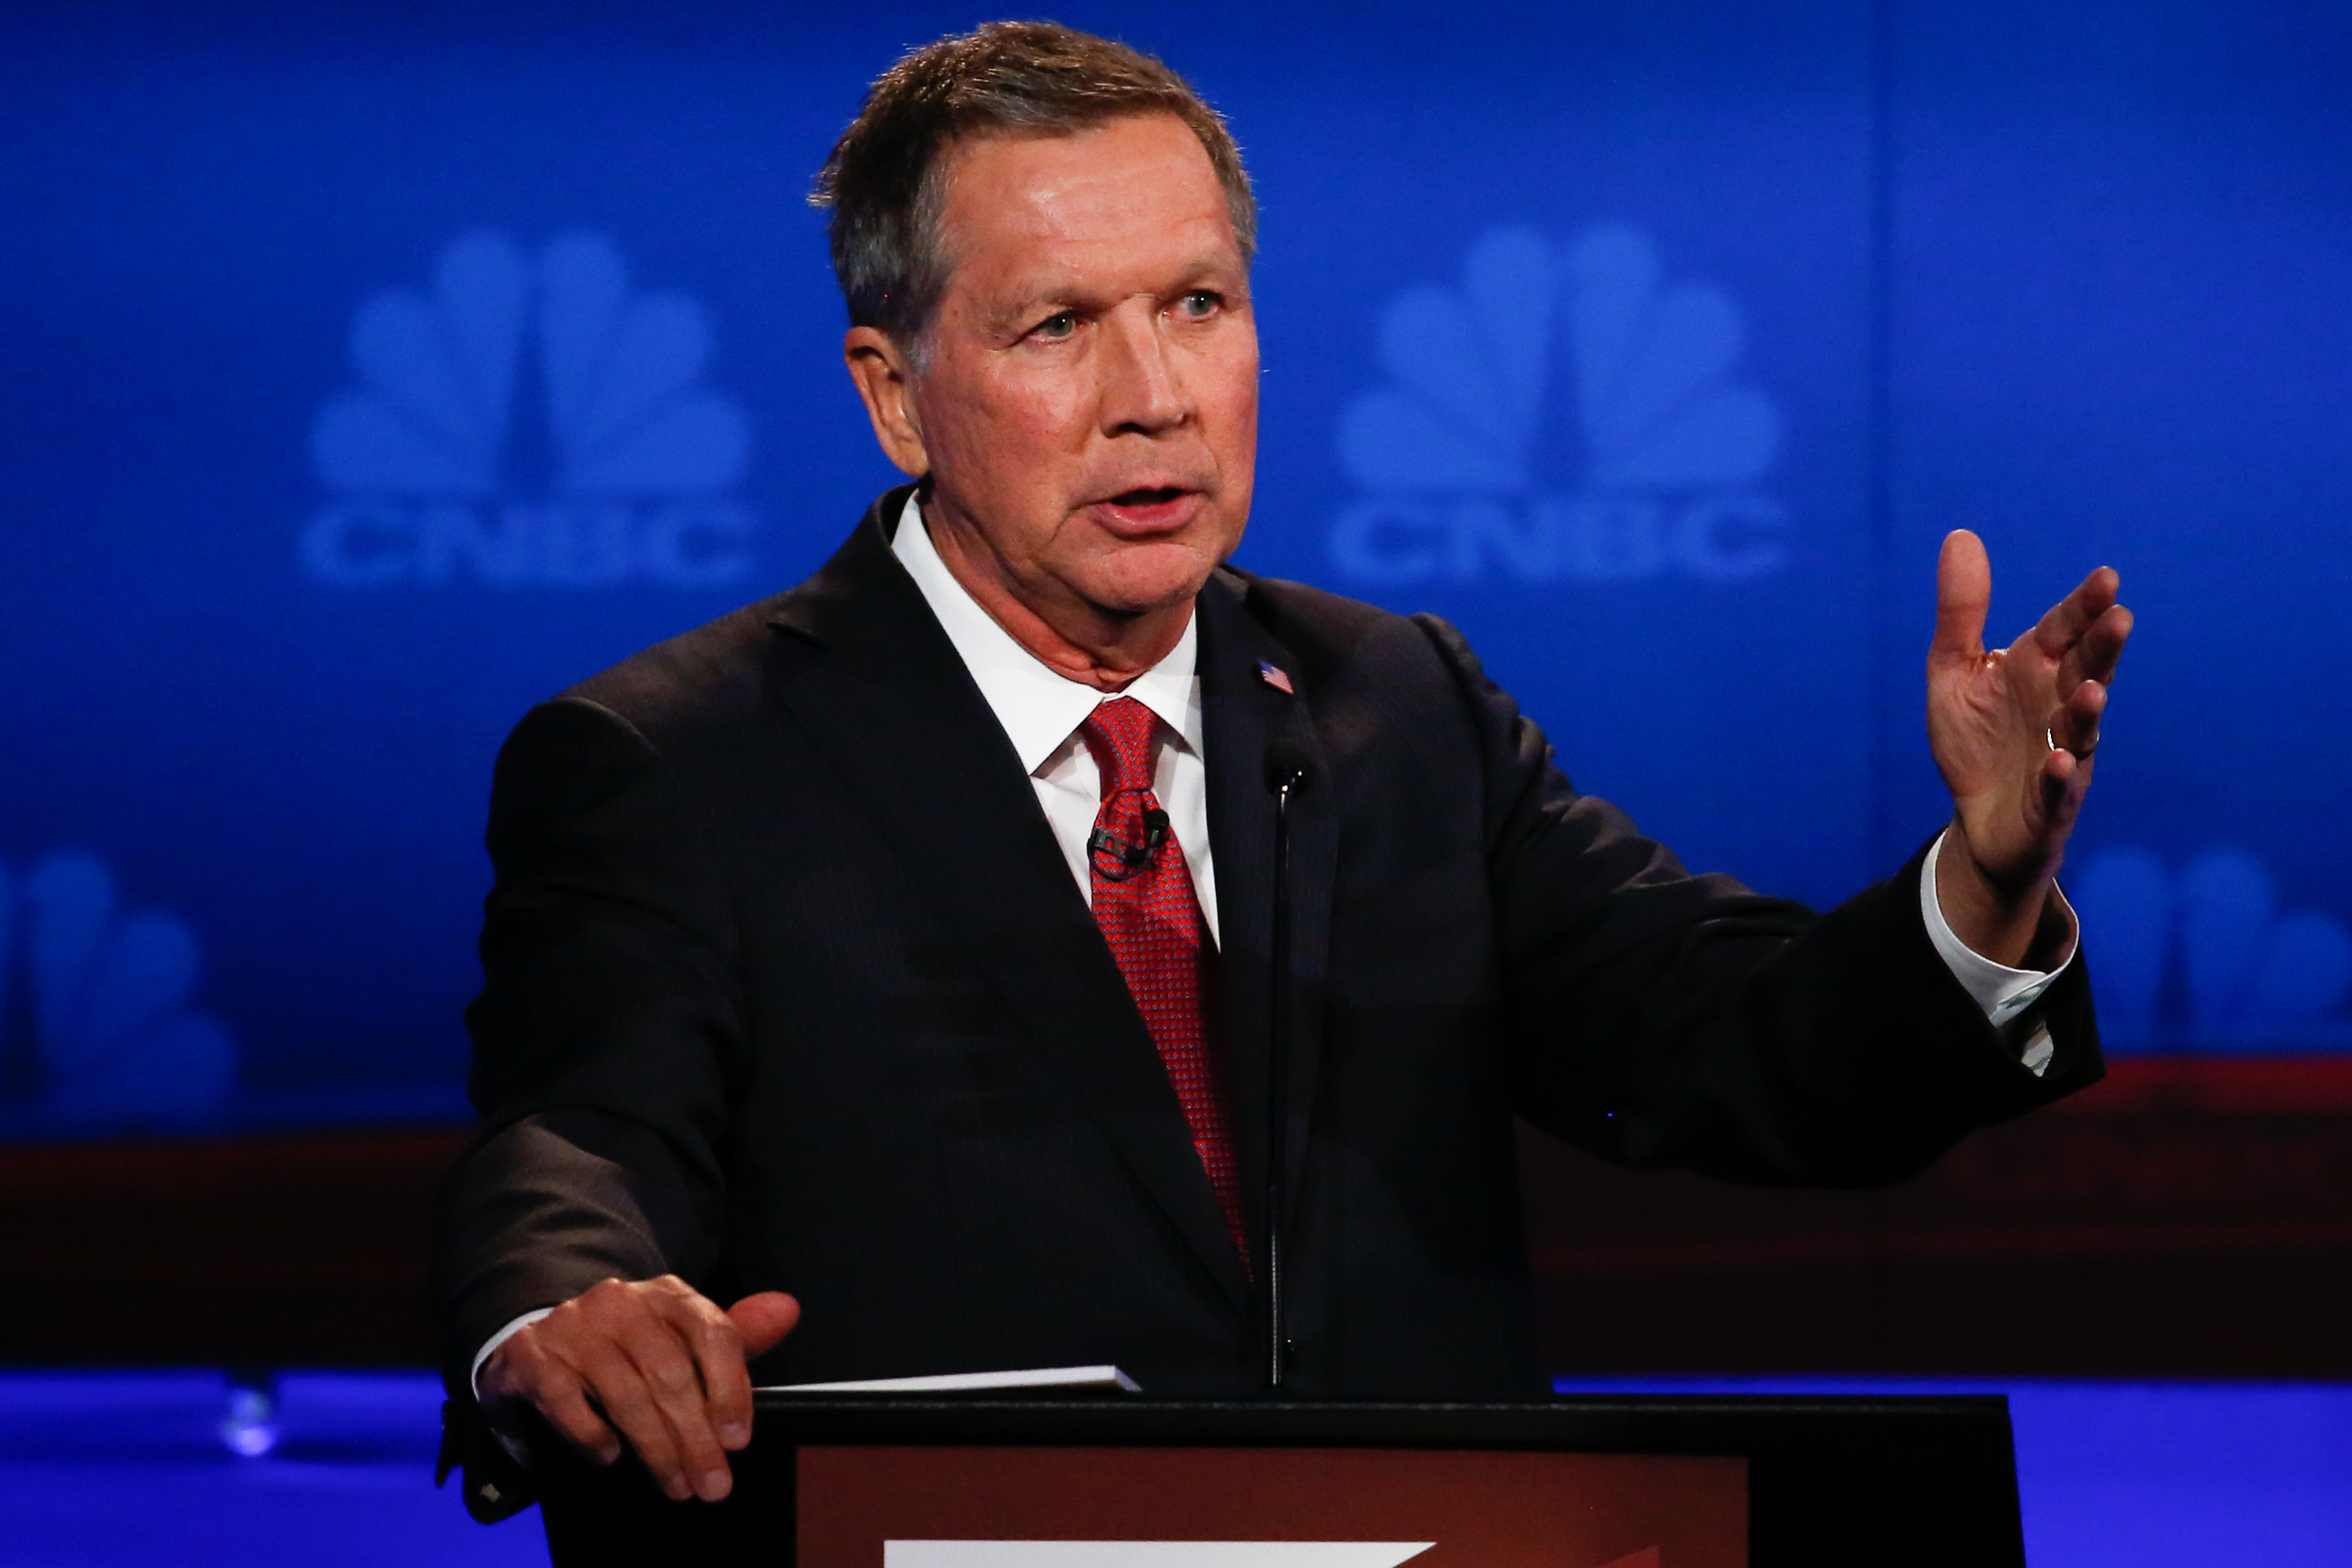 John Kasich participates in CNBC's "Your Money, Your Vote: The Republican Presidential Debate" live from the University of Colorado Boulder in Boulder, Colo., on Oct, 28, 2015. (NBCU Photo Bank via Getty Images)